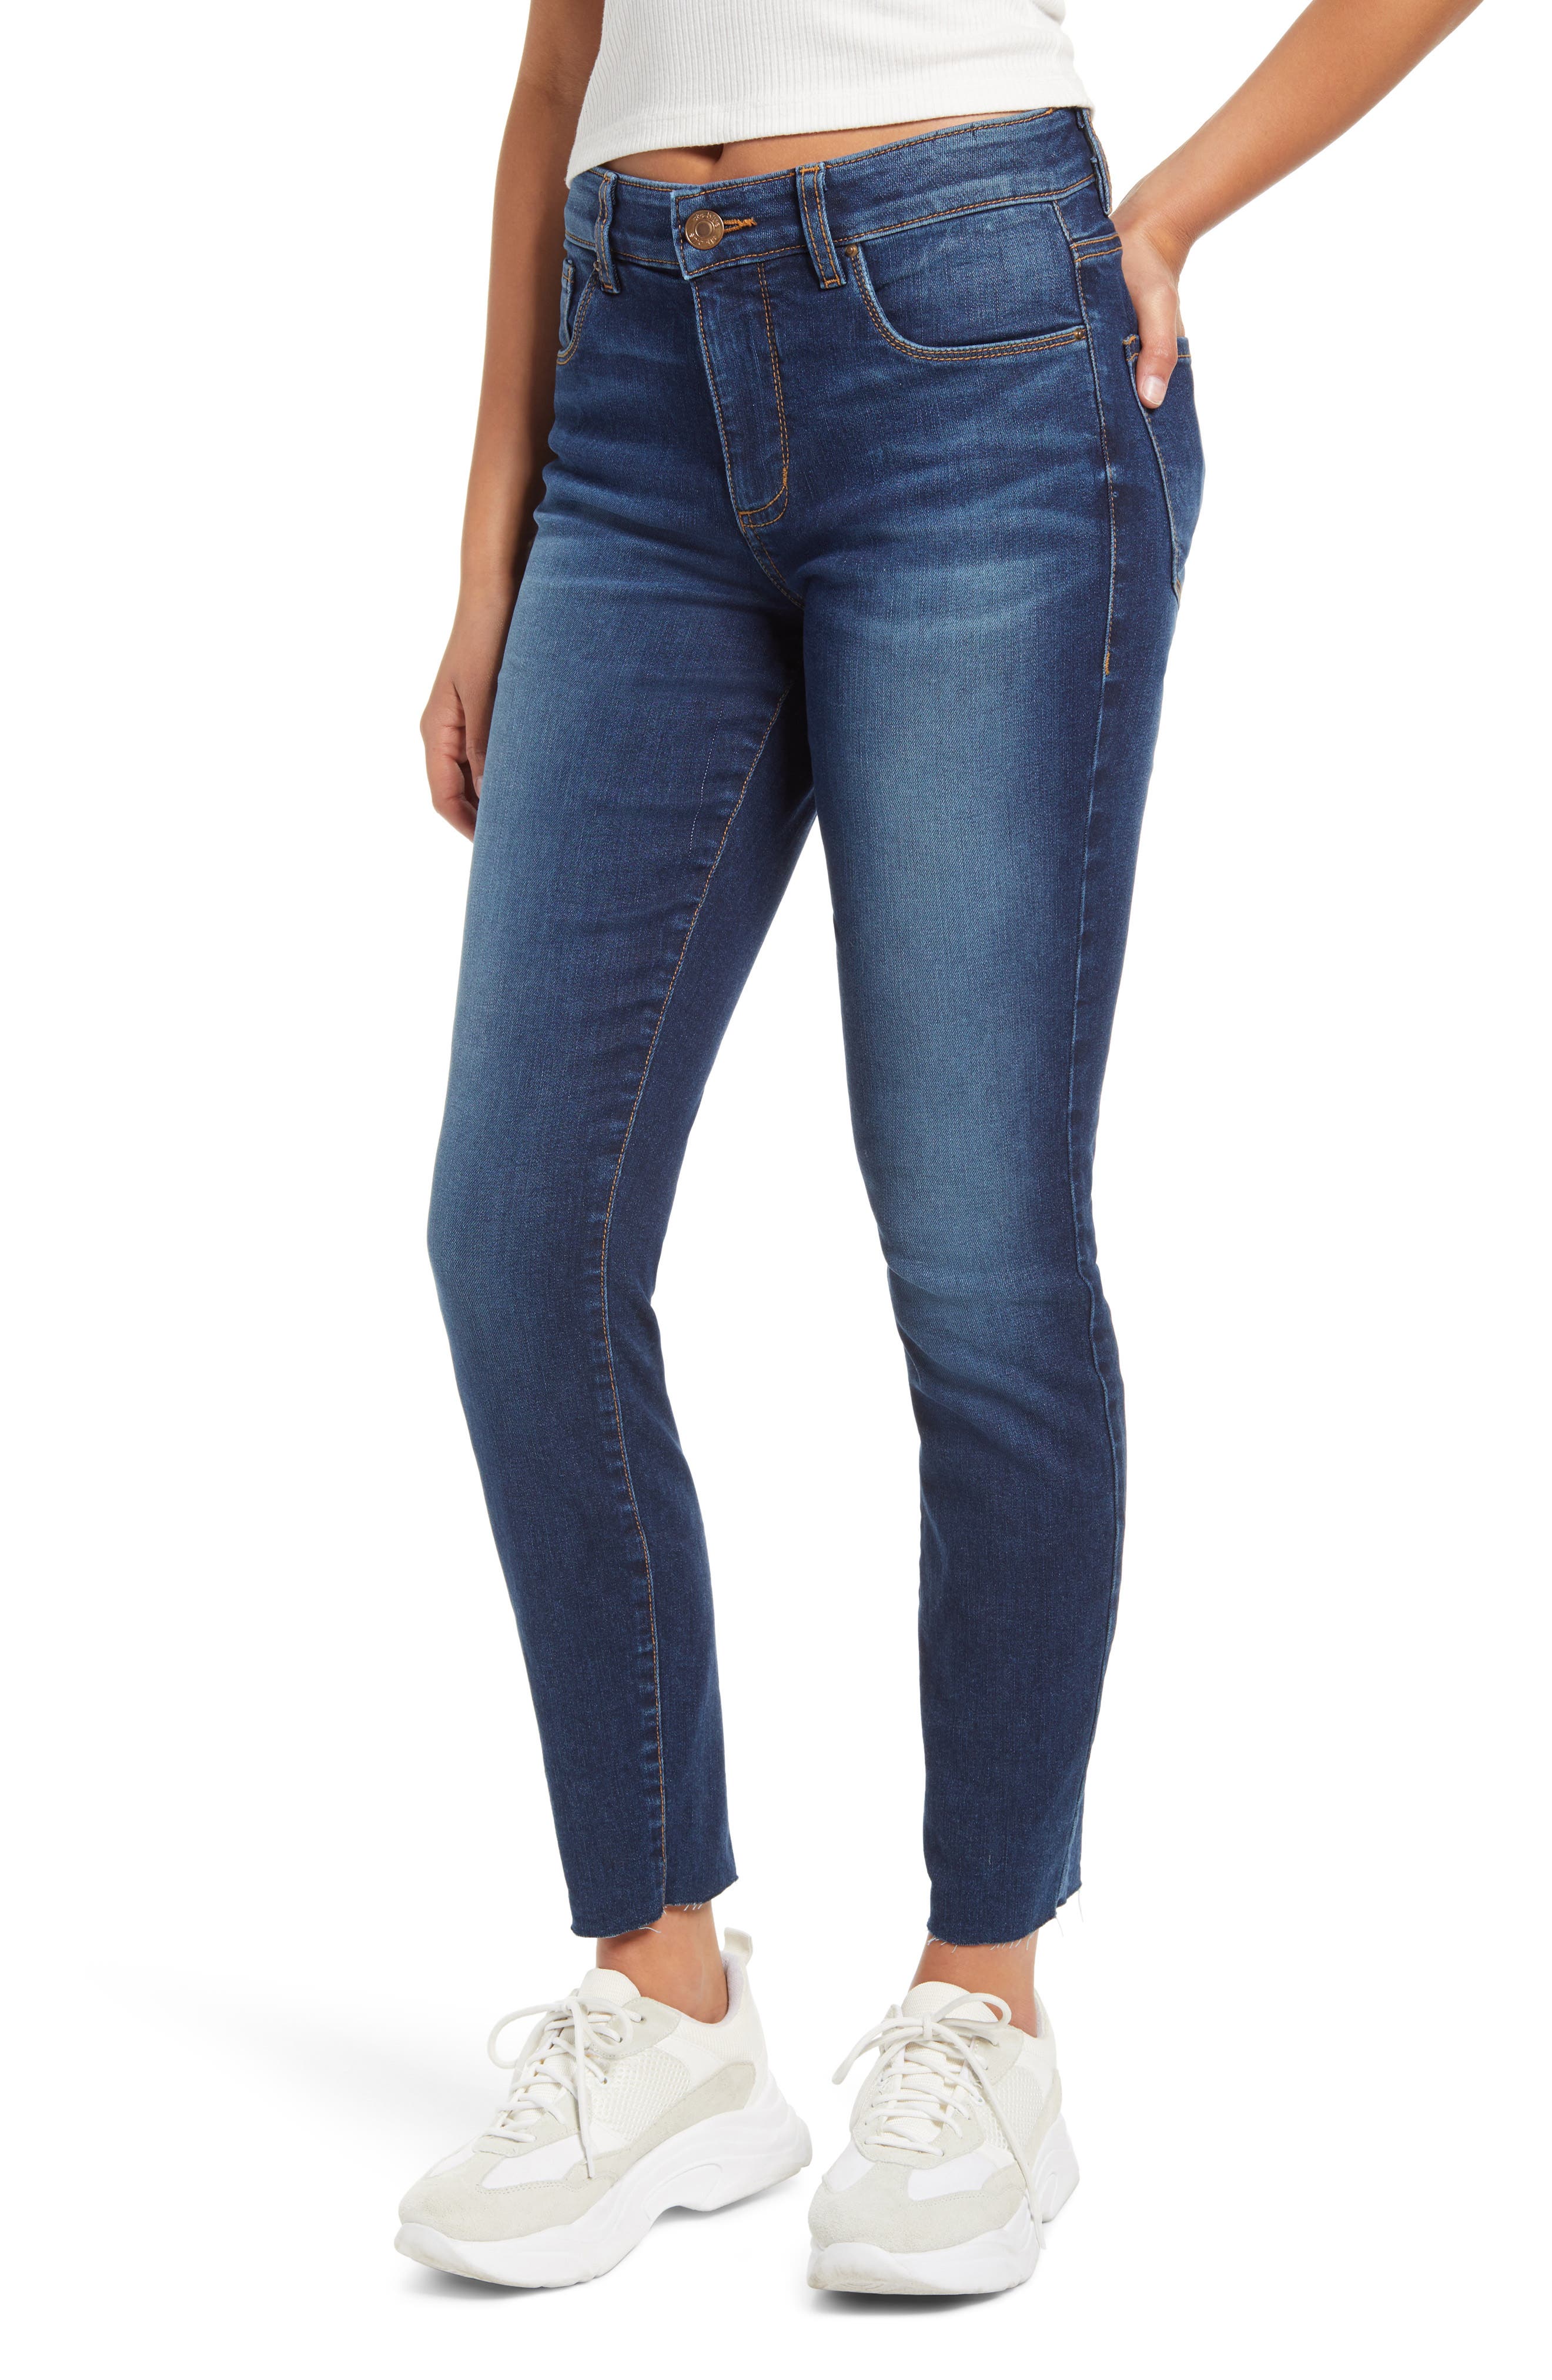 STS BLUE Piper Foil Crop Skinny Jeans 28 NWT $69 